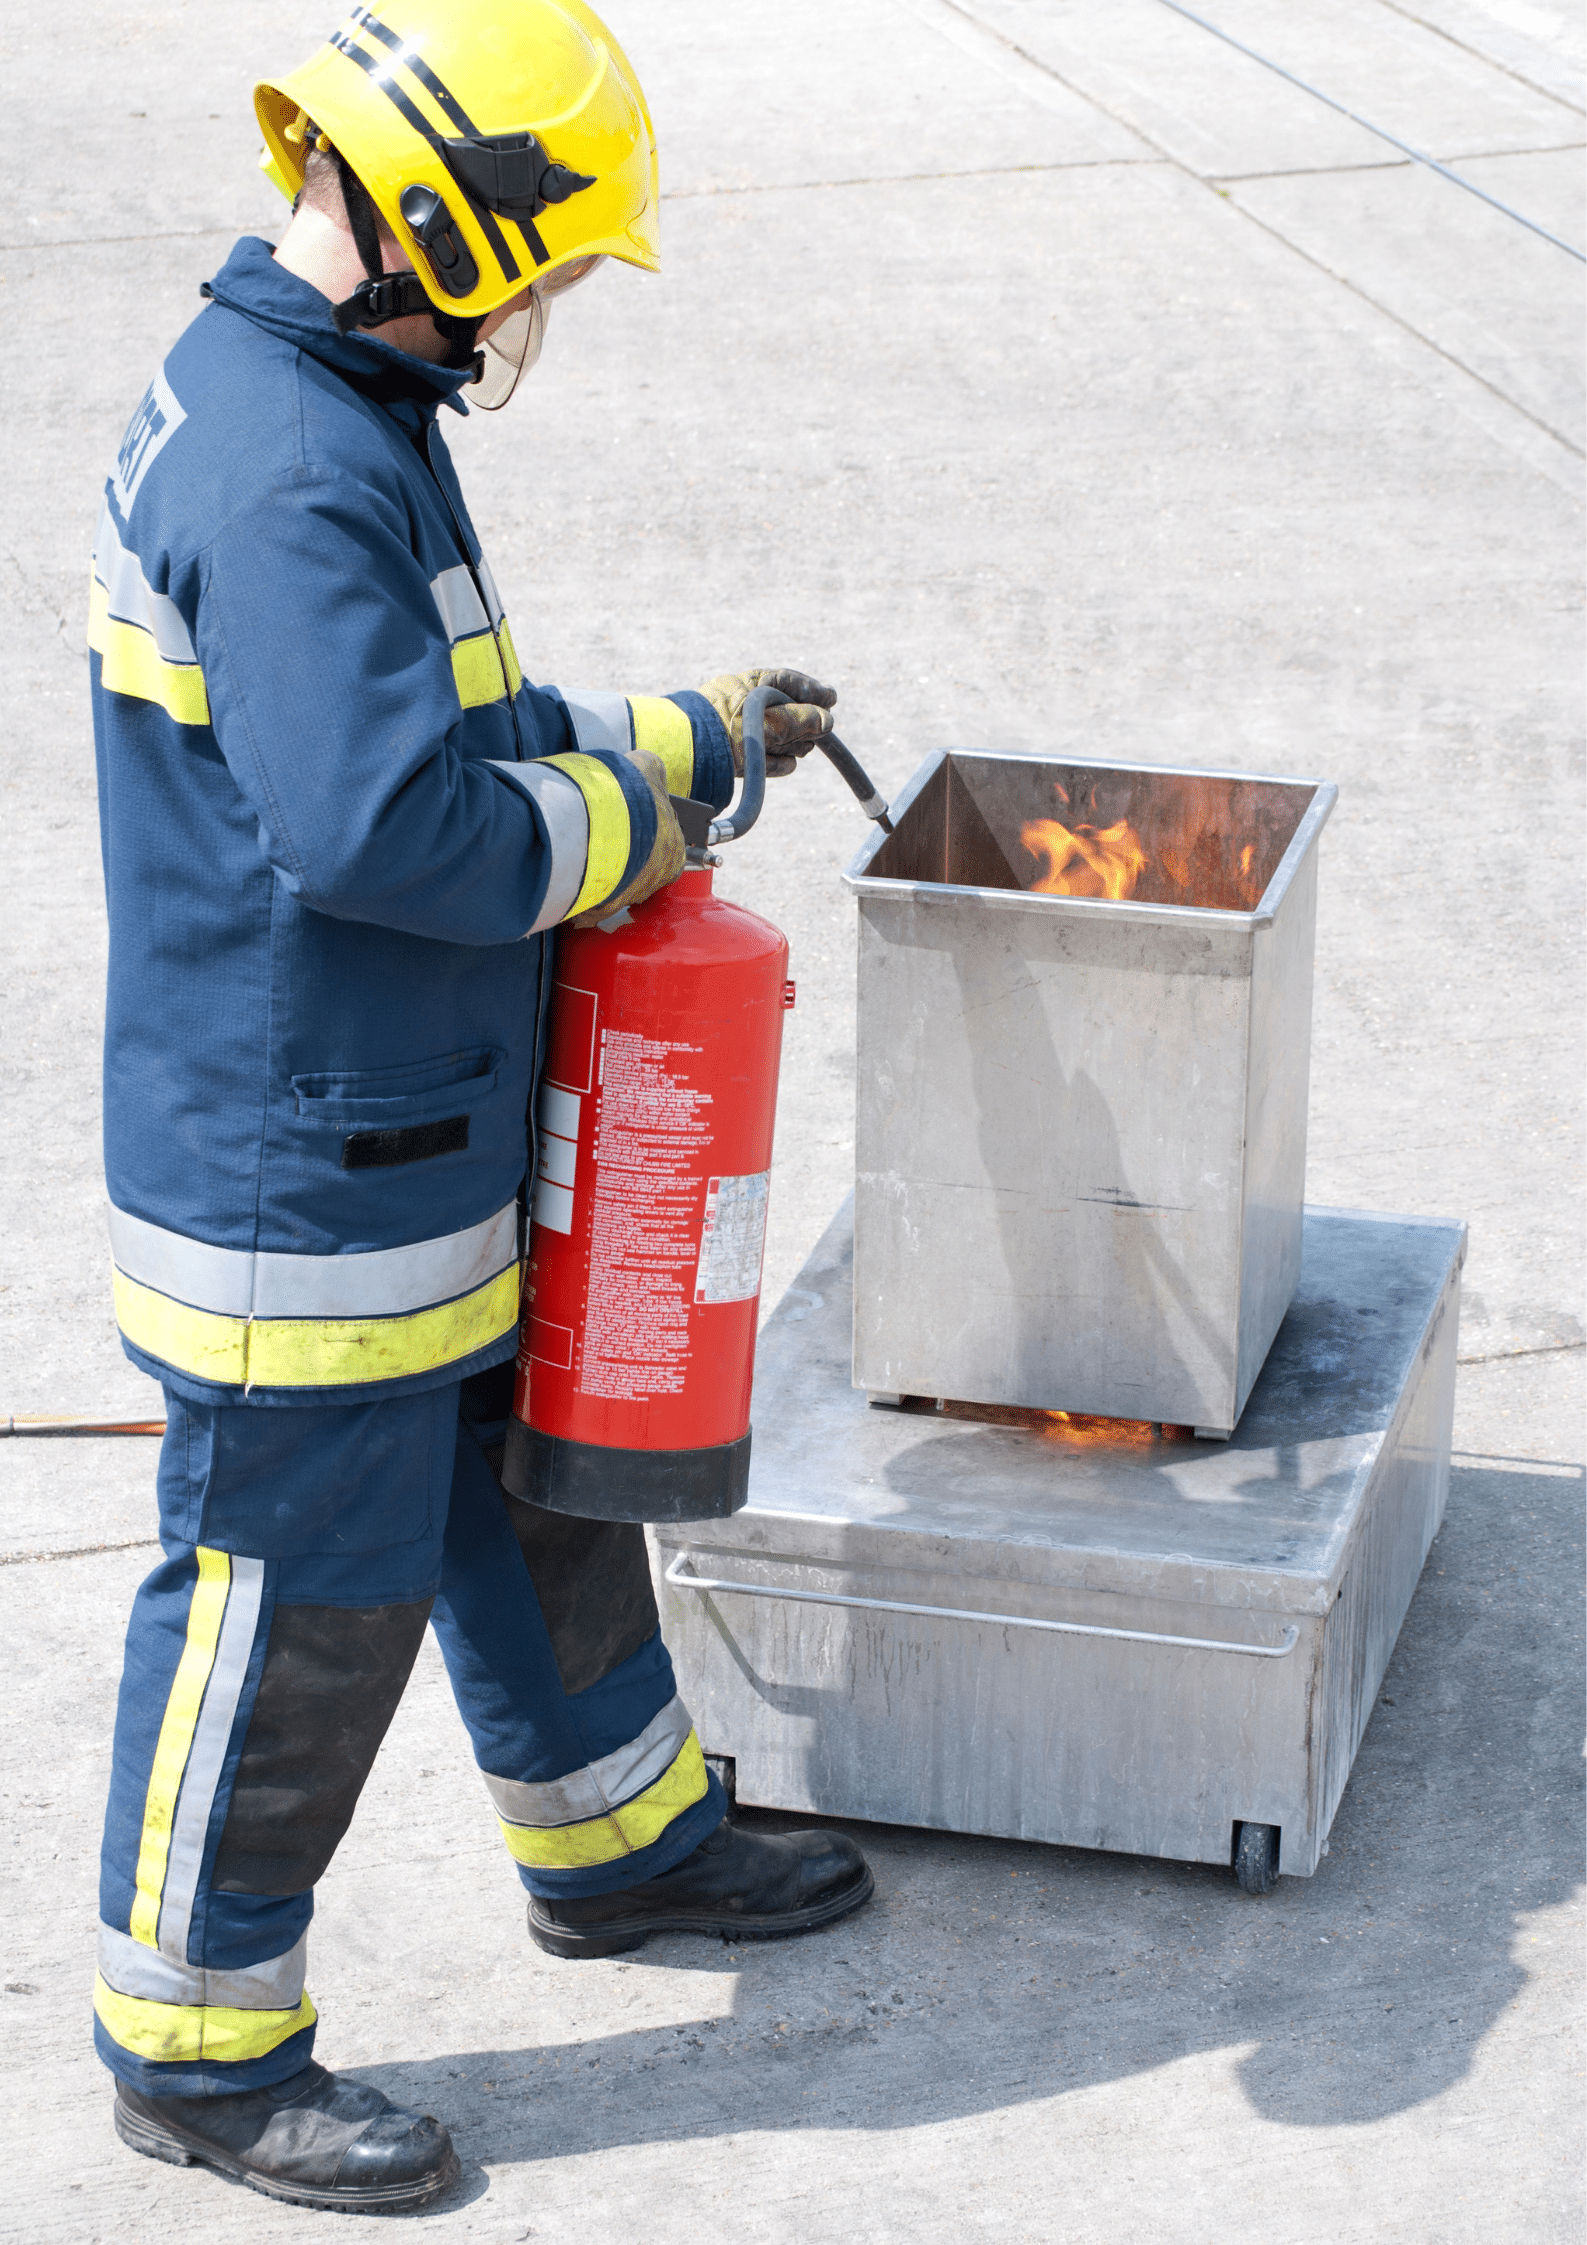 fire extinguisher in use